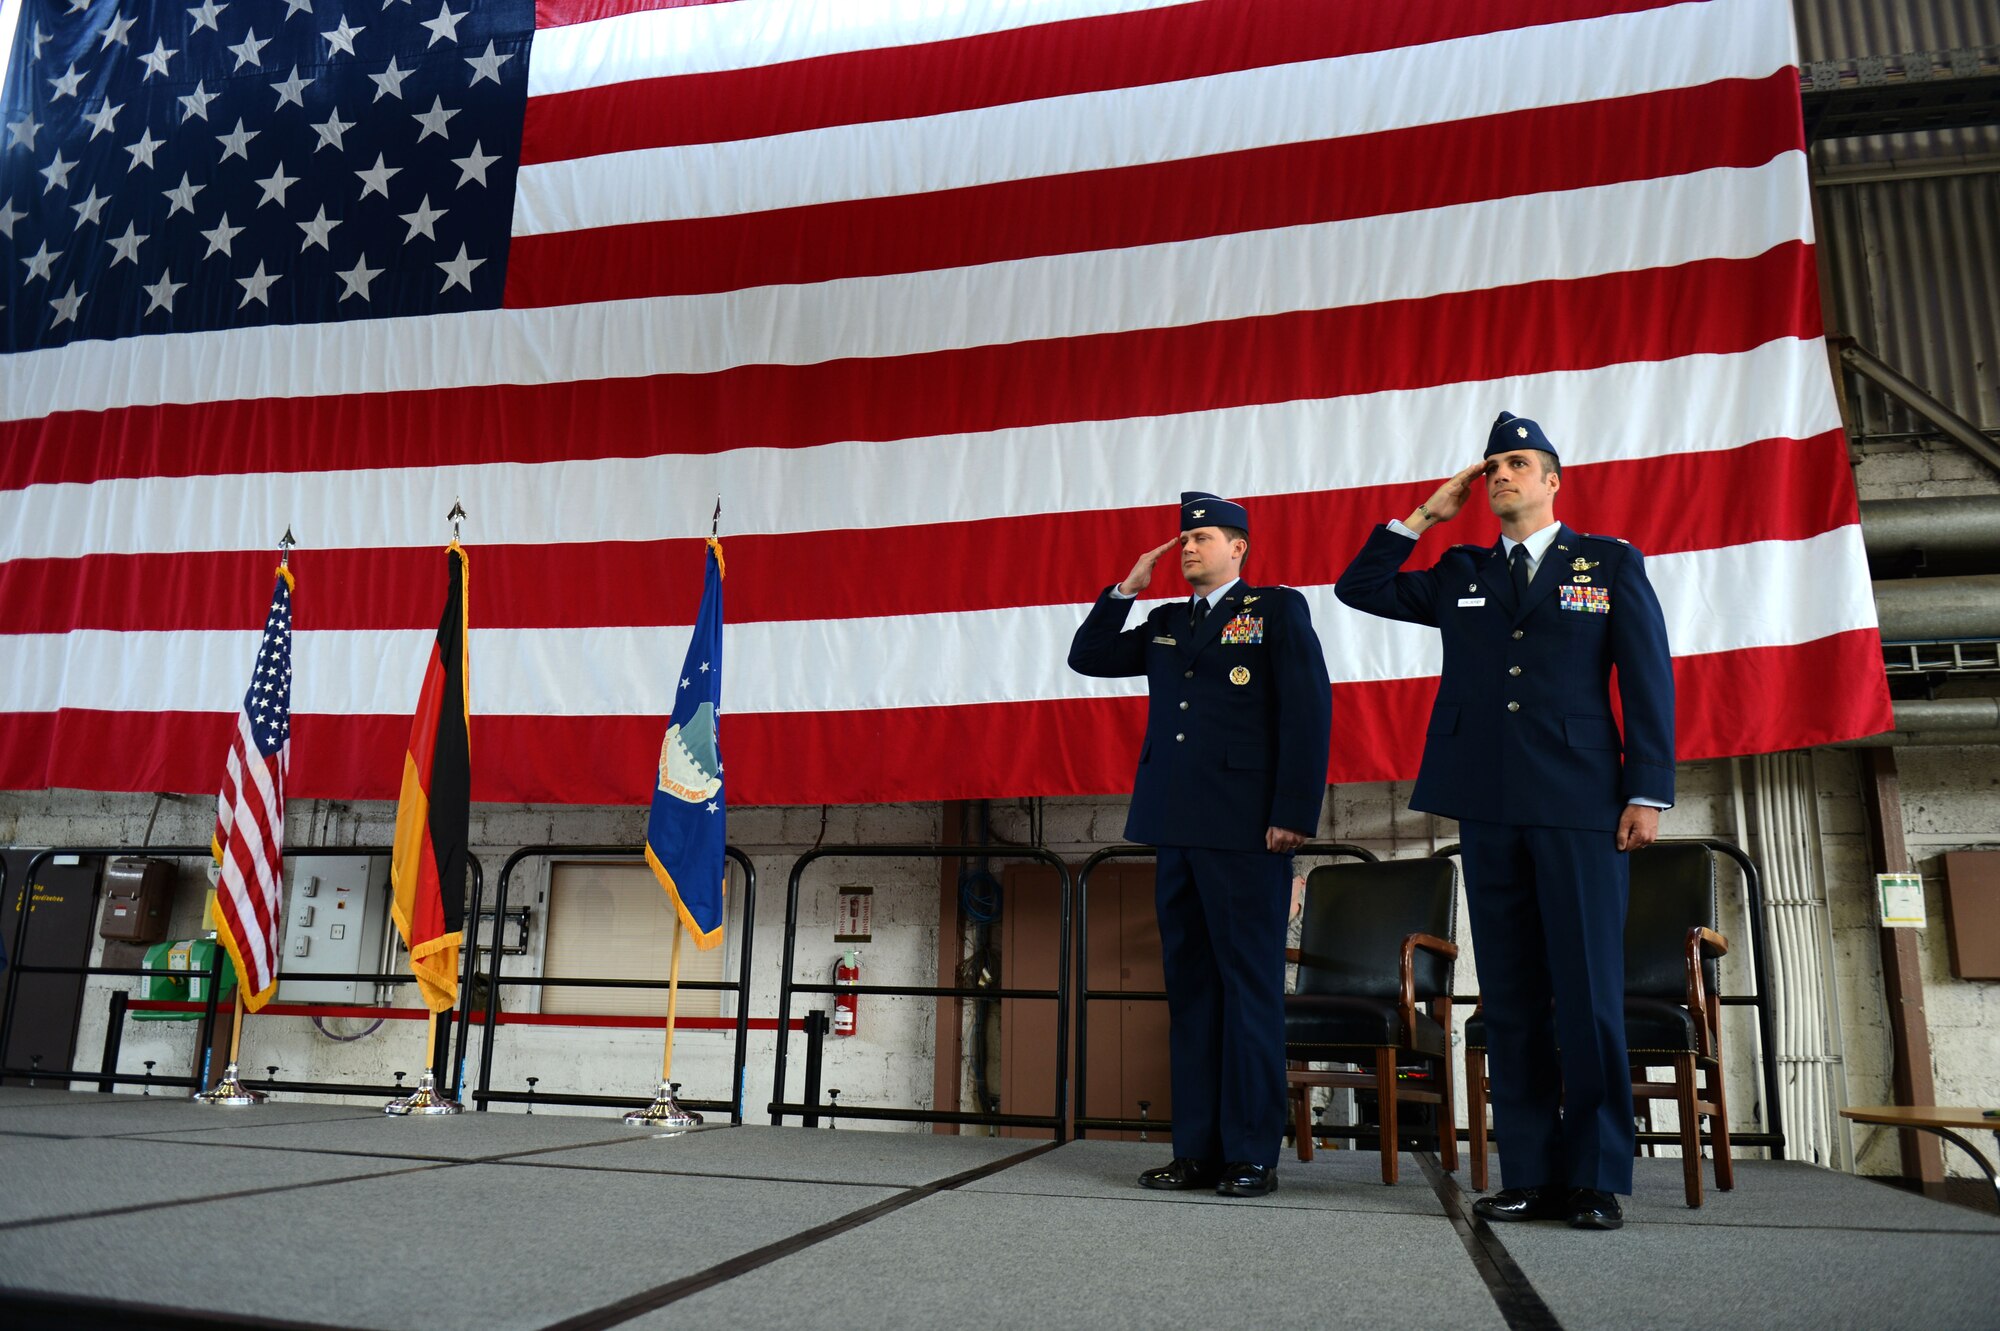 SPANGDAHLEM AIR BASE, Germany – U.S. Air Force Col. David Lyons, 52nd Operations Group commander, and U.S. Air Force Lt. Col. Clinton Eichelberger, 81st Fighter Squadron commander salute during an inactivation ceremony June 18, 2013, at Spangdahlem AB. The Air Force merged missions and cut manning and equipment to stay within its approved budget, resulting in the closure of the 81st FS. (U.S. Air Force photo by Airman 1st Class Gustavo Castillo/Released) 